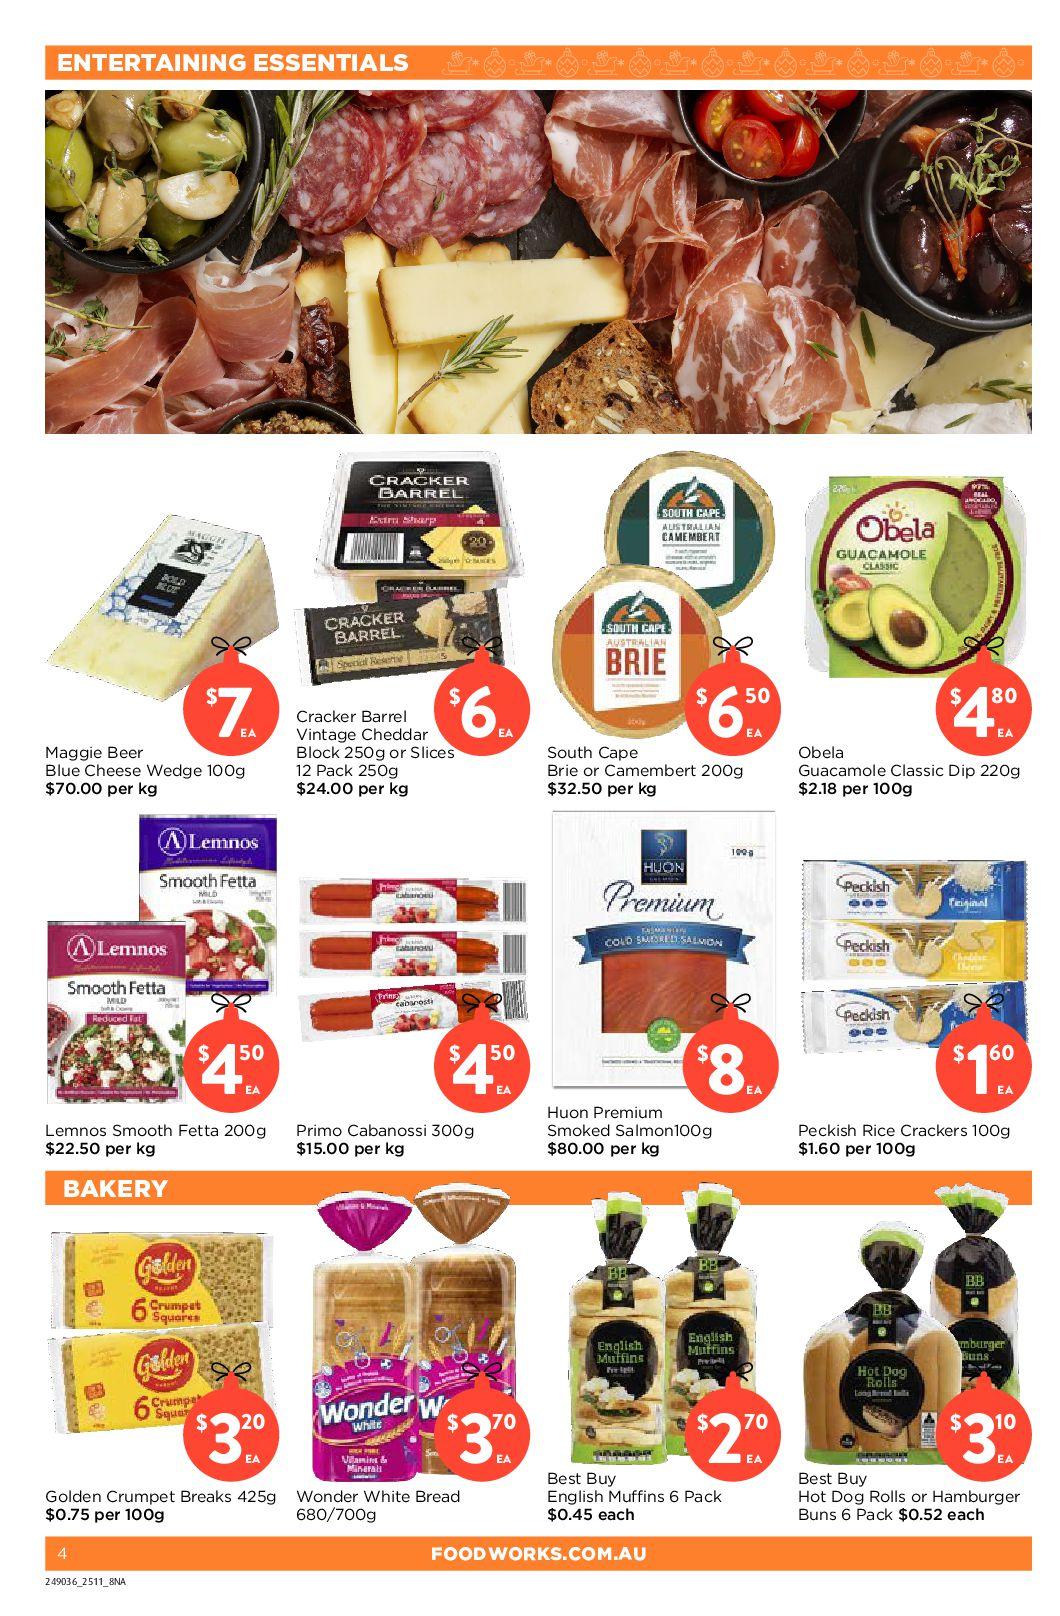 FoodWorks Catalogues from 25 November